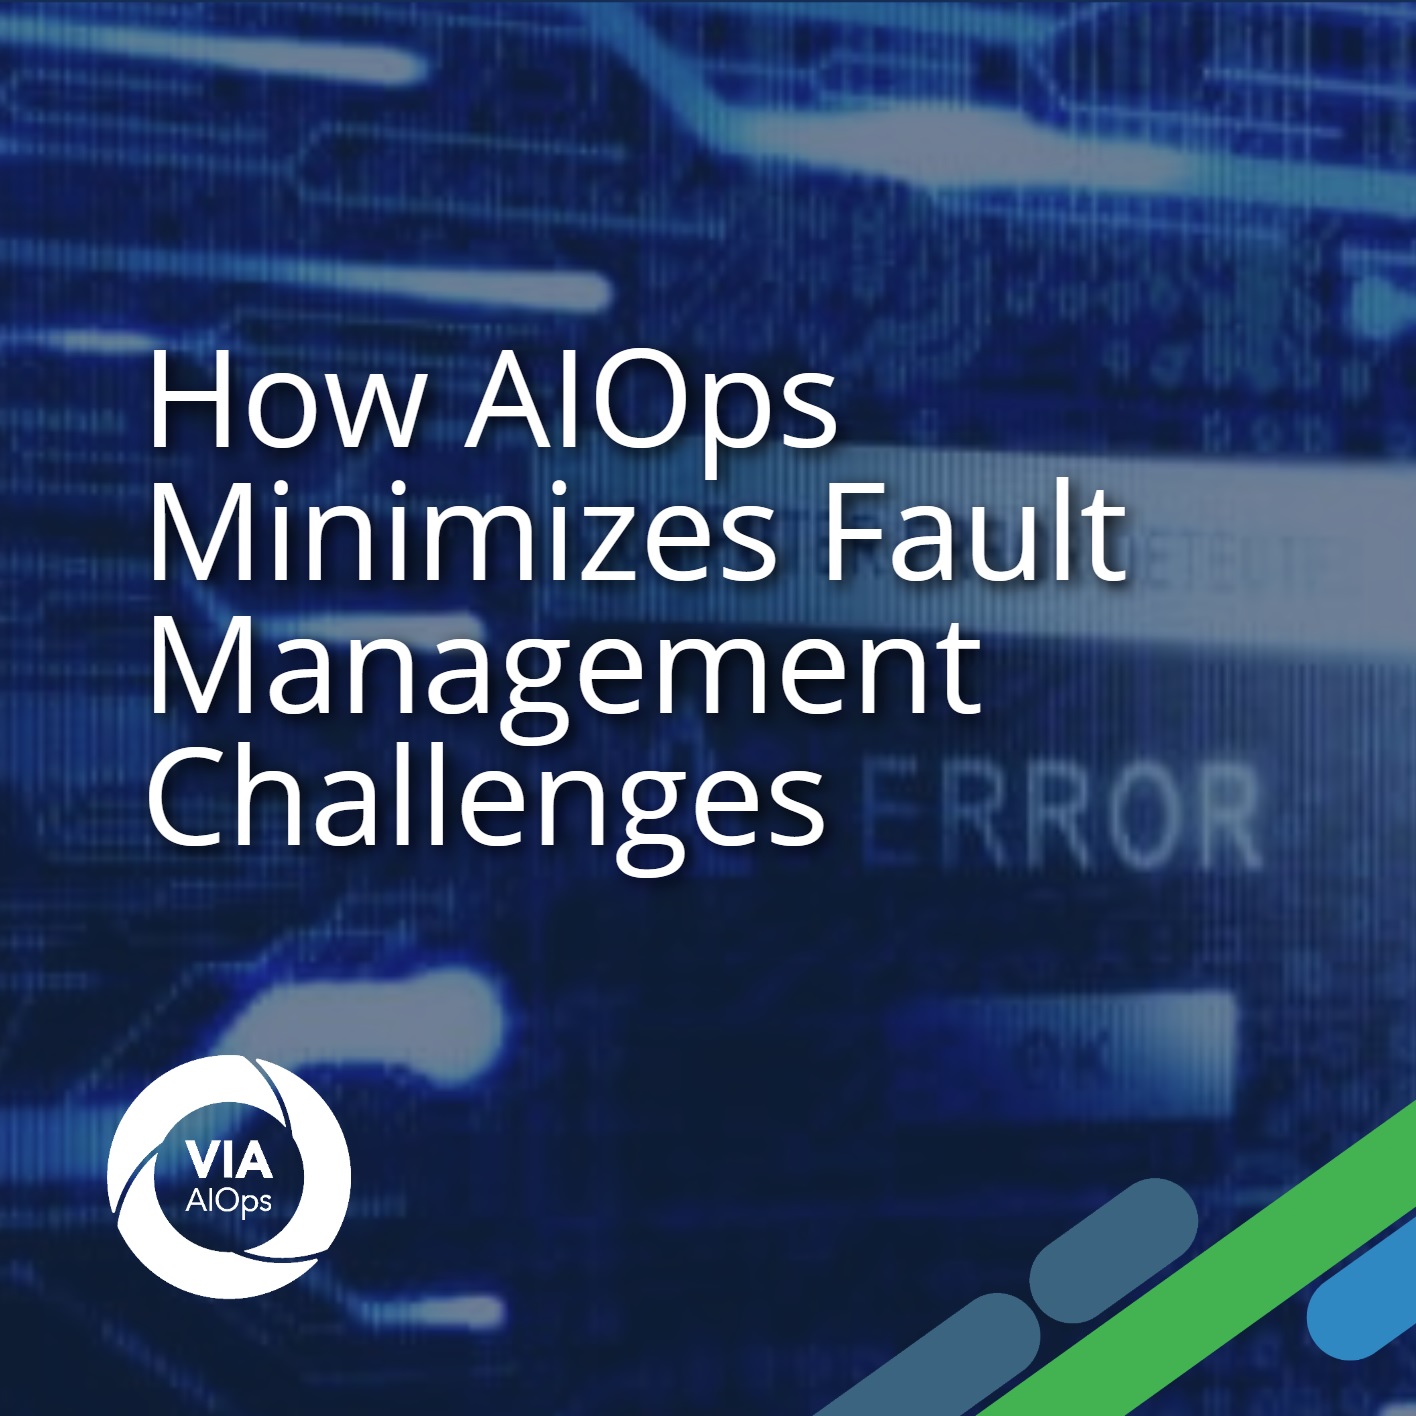 Management challenges image for AIOps